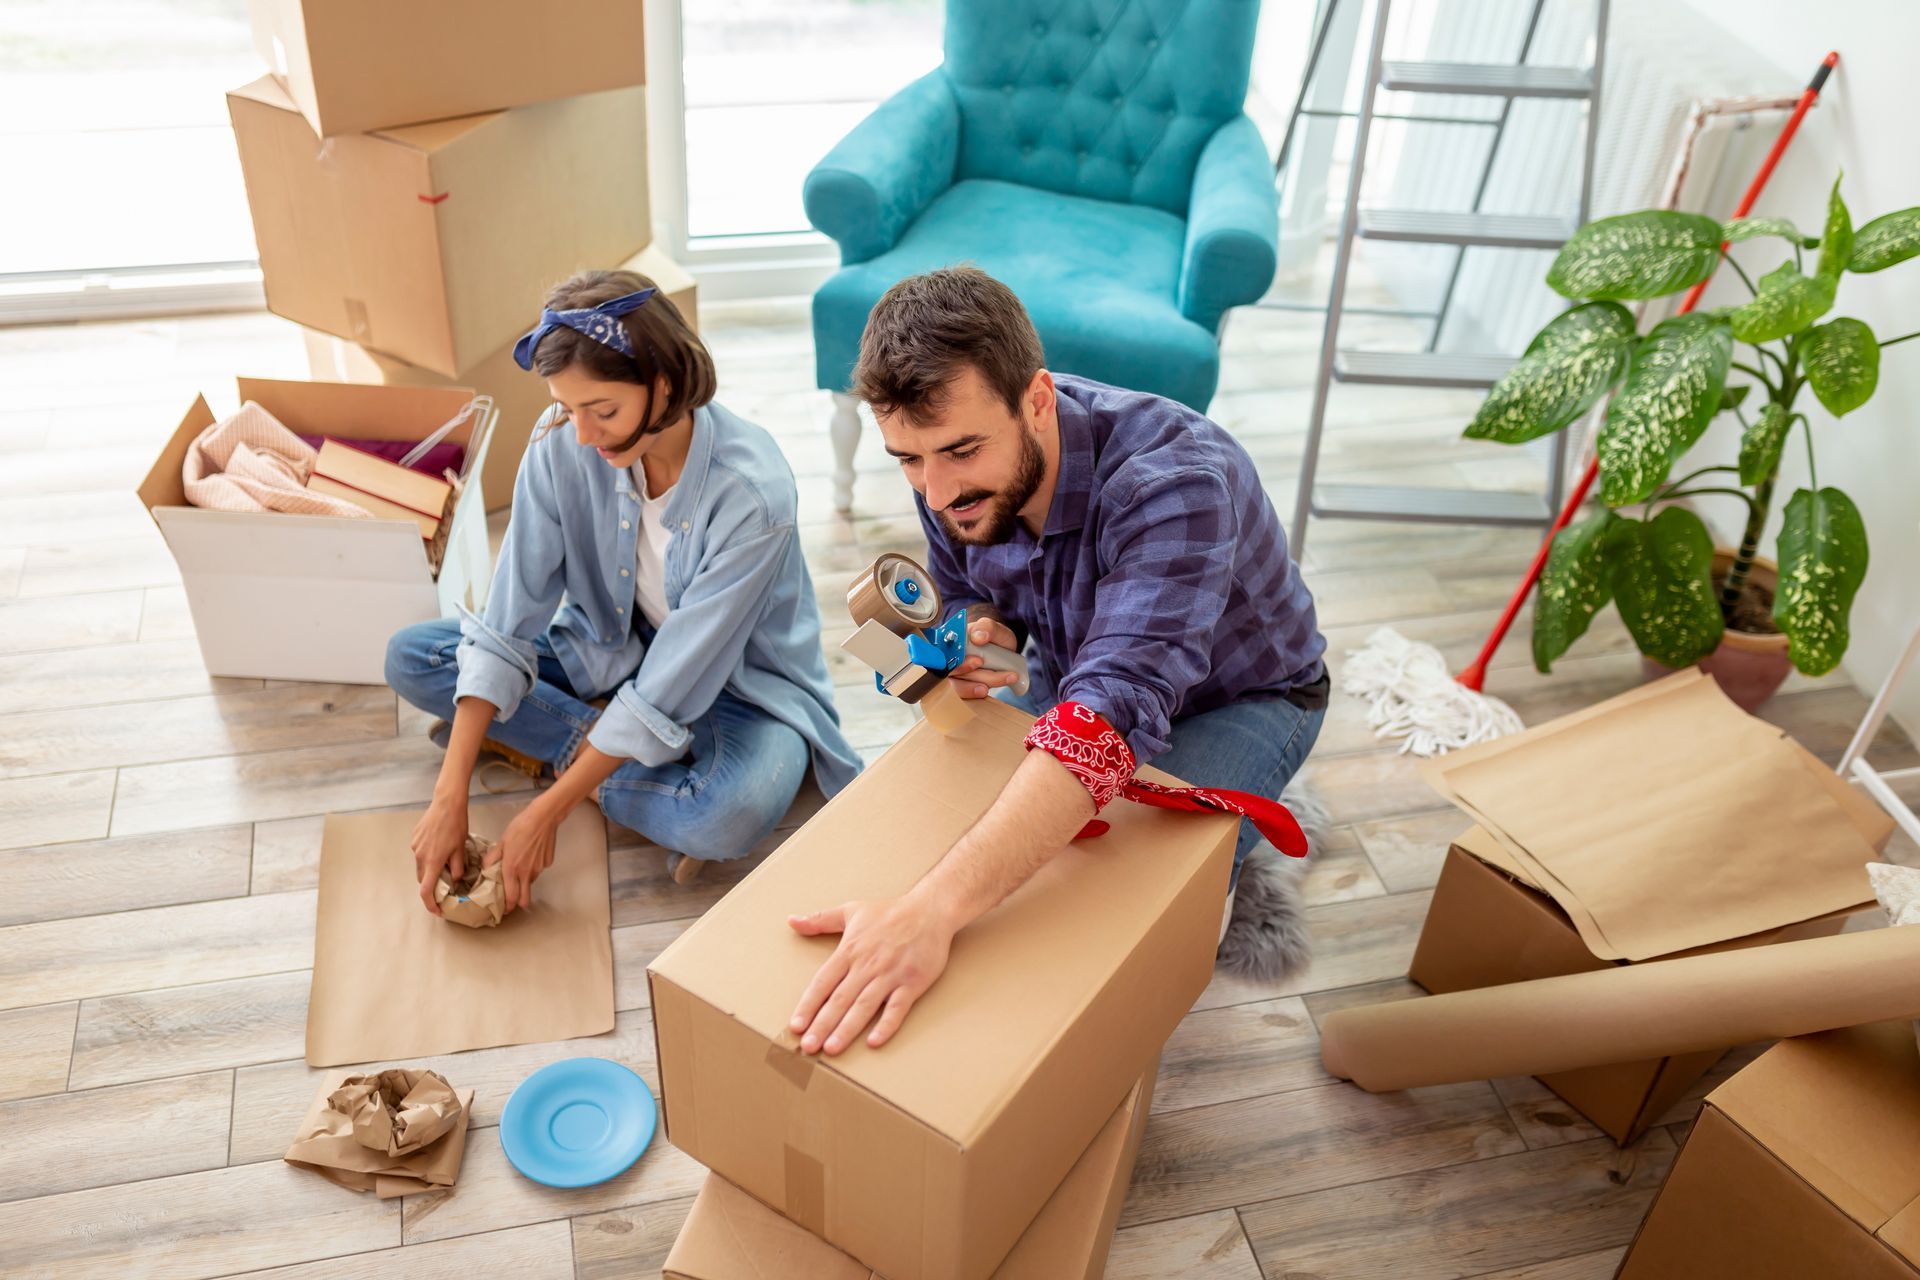 Man and woman packing boxes in their living room 